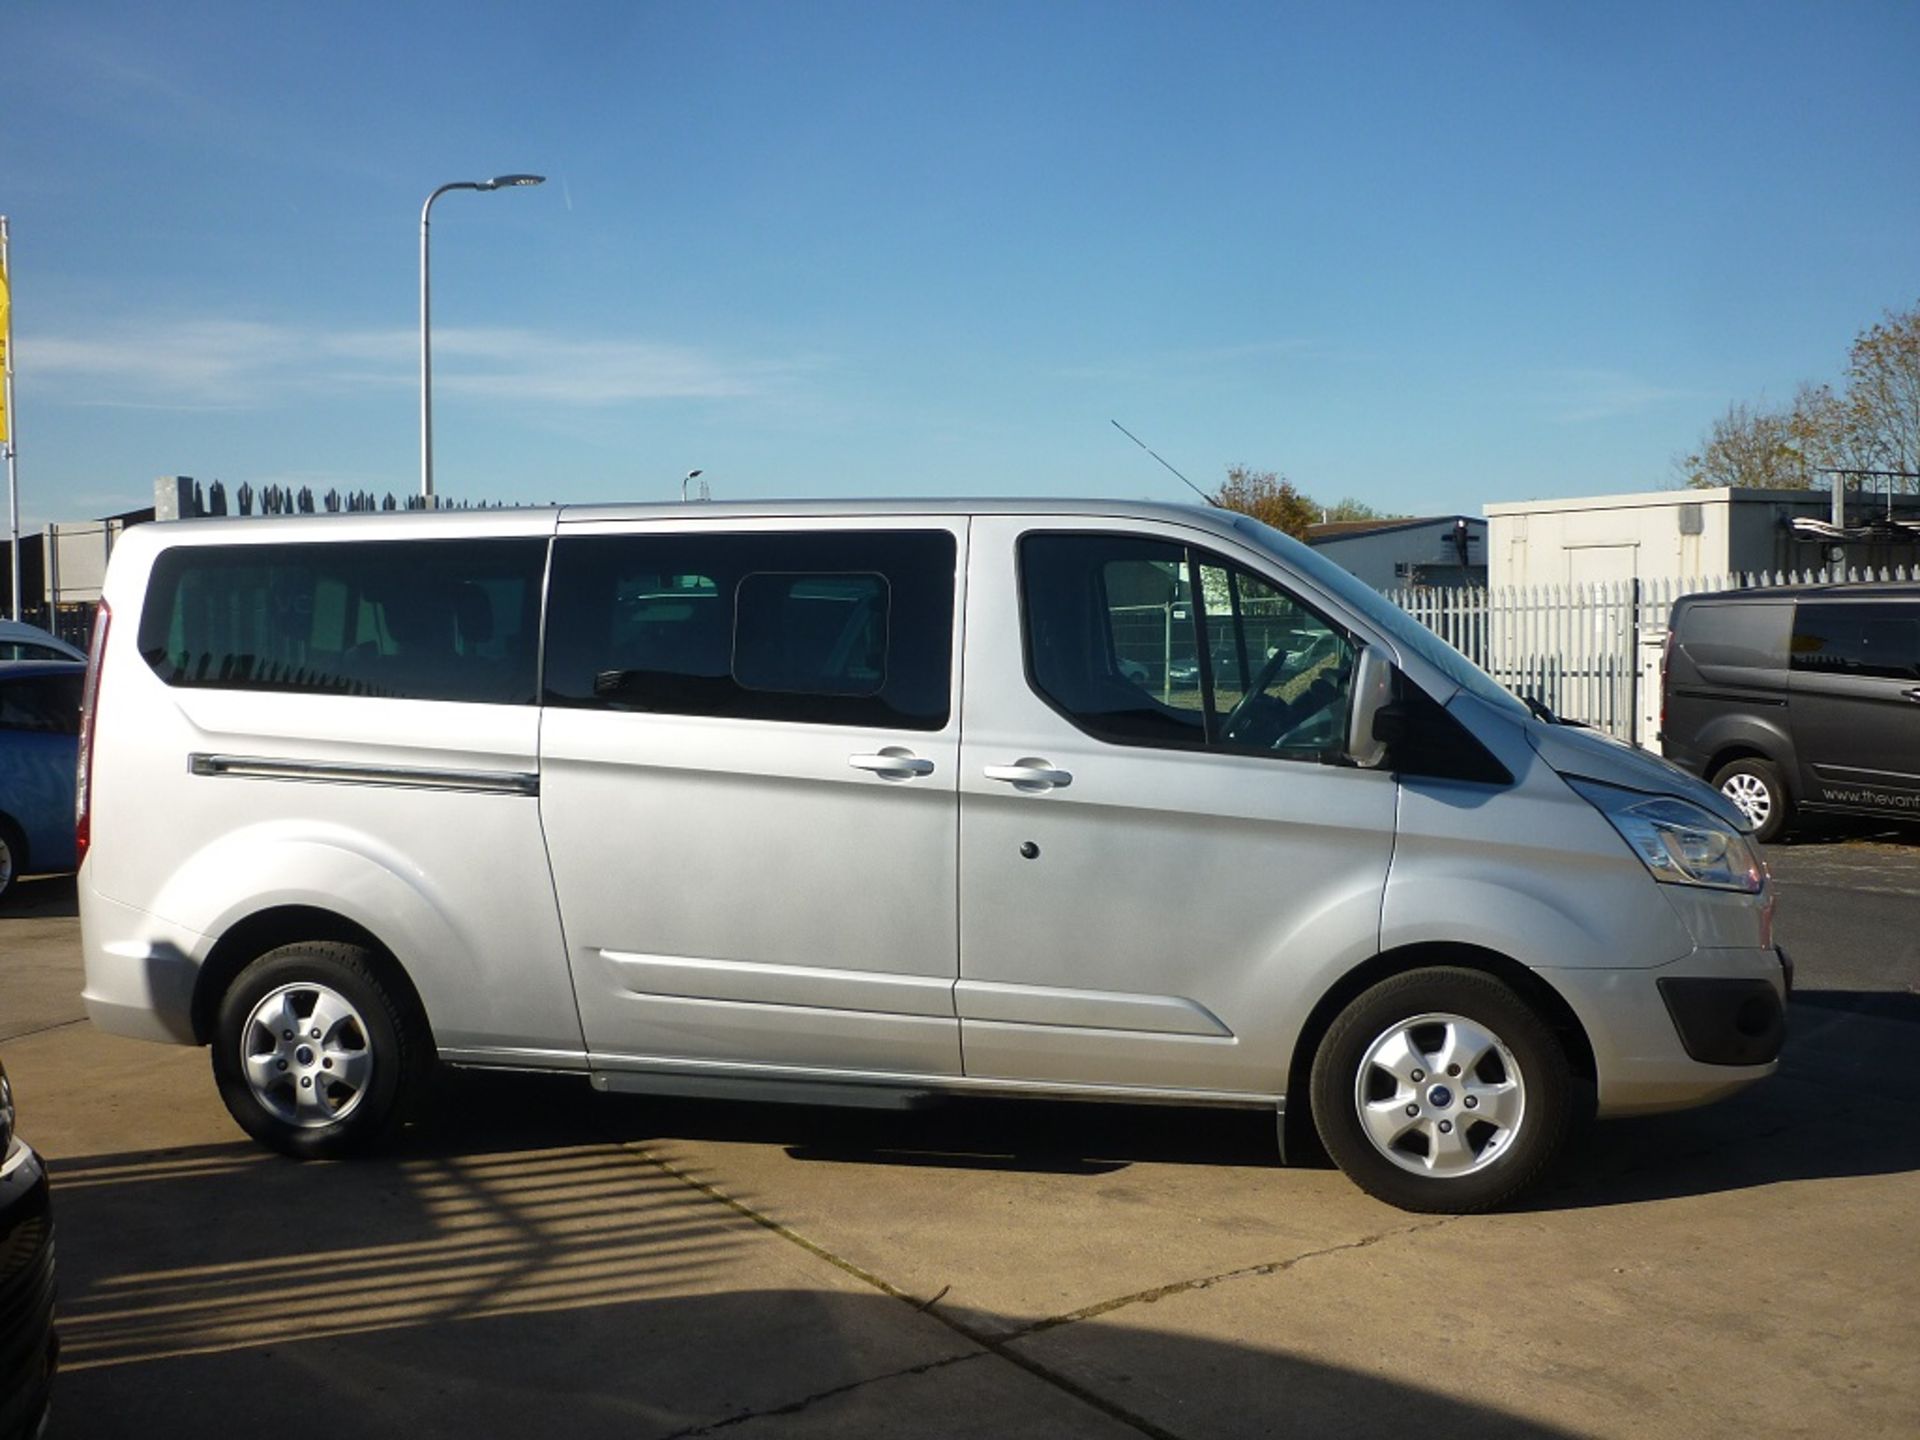 2015/15 REG FORD TOURNEO CUSTOM 300 LIMITED EDITION SILVER DIESEL MPV, SHOWING 0 FORMER KEEPERS